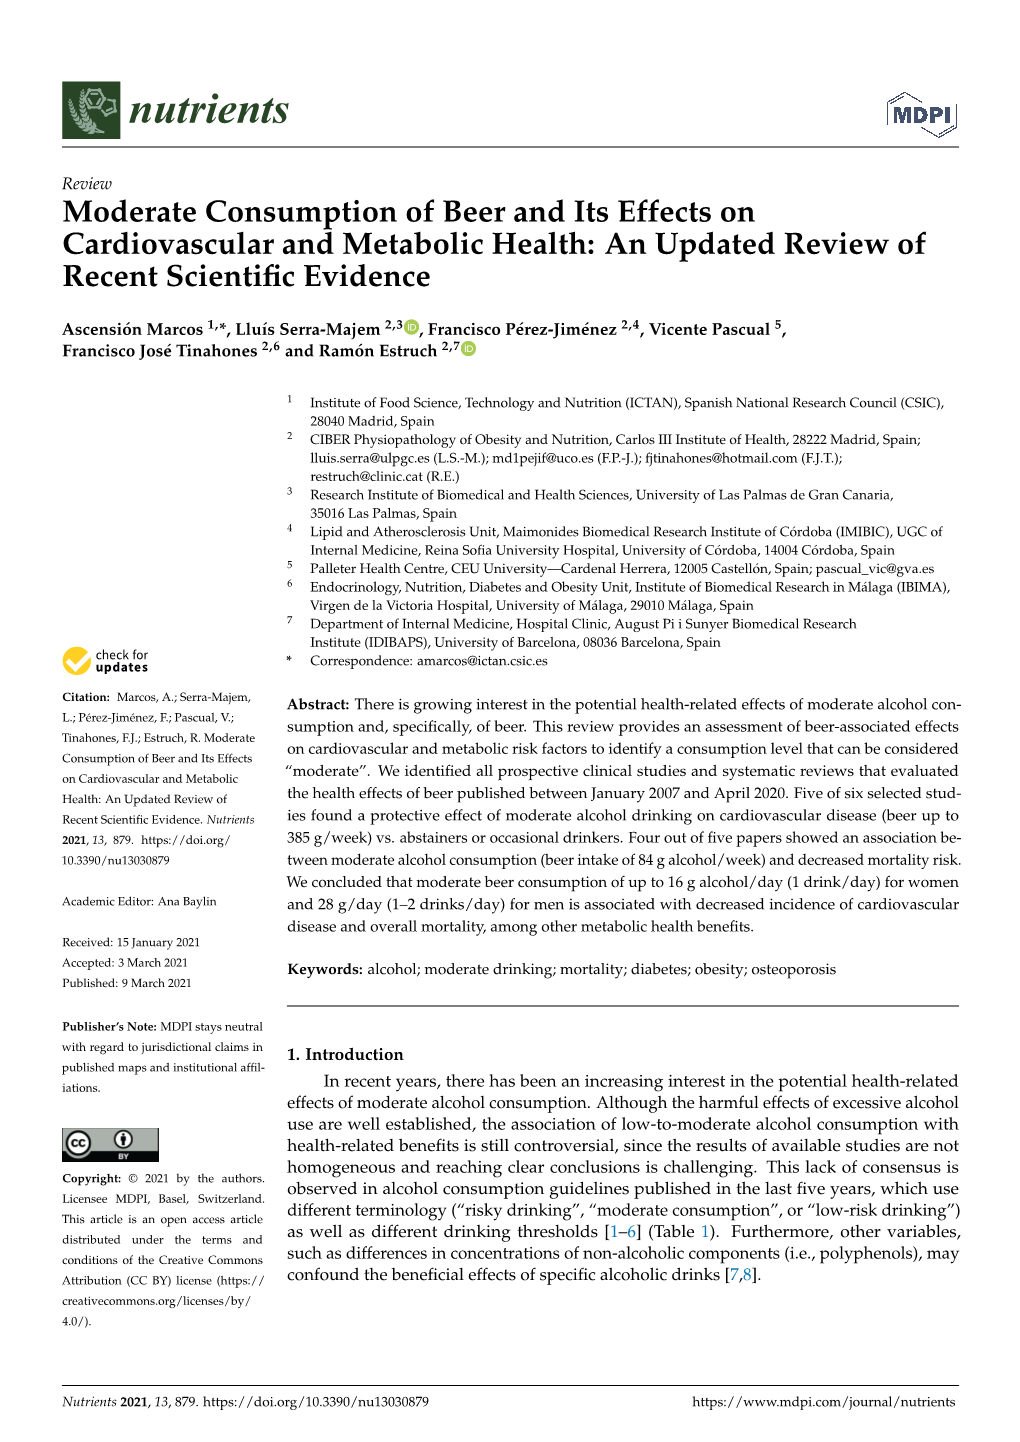 Moderate Consumption of Beer and Its Effects on Cardiovascular and Metabolic Health: an Updated Review of Recent Scientiﬁc Evidence